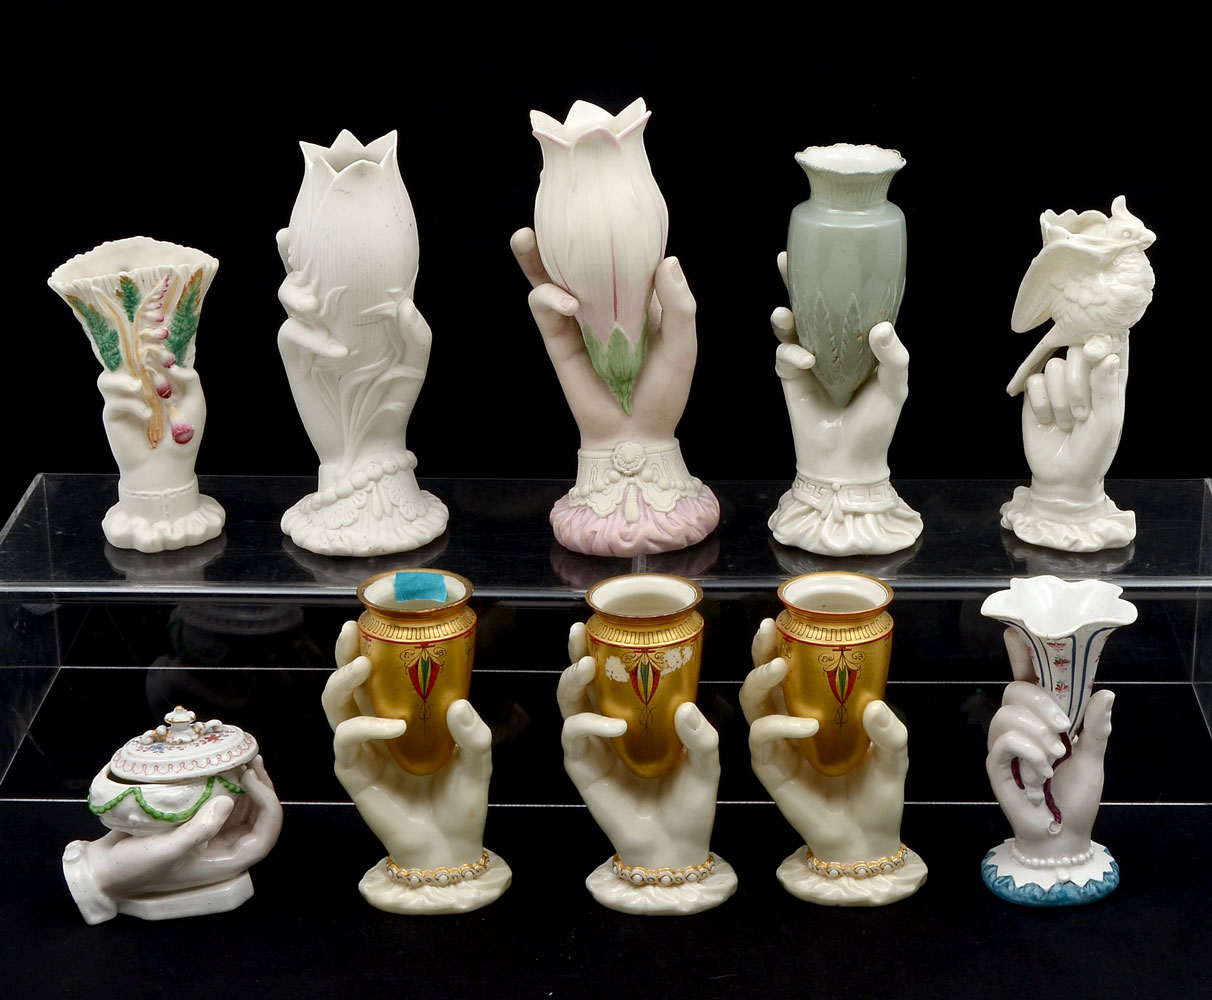 10 PIECE HAND VASE COLLECTION WITH 36eb04